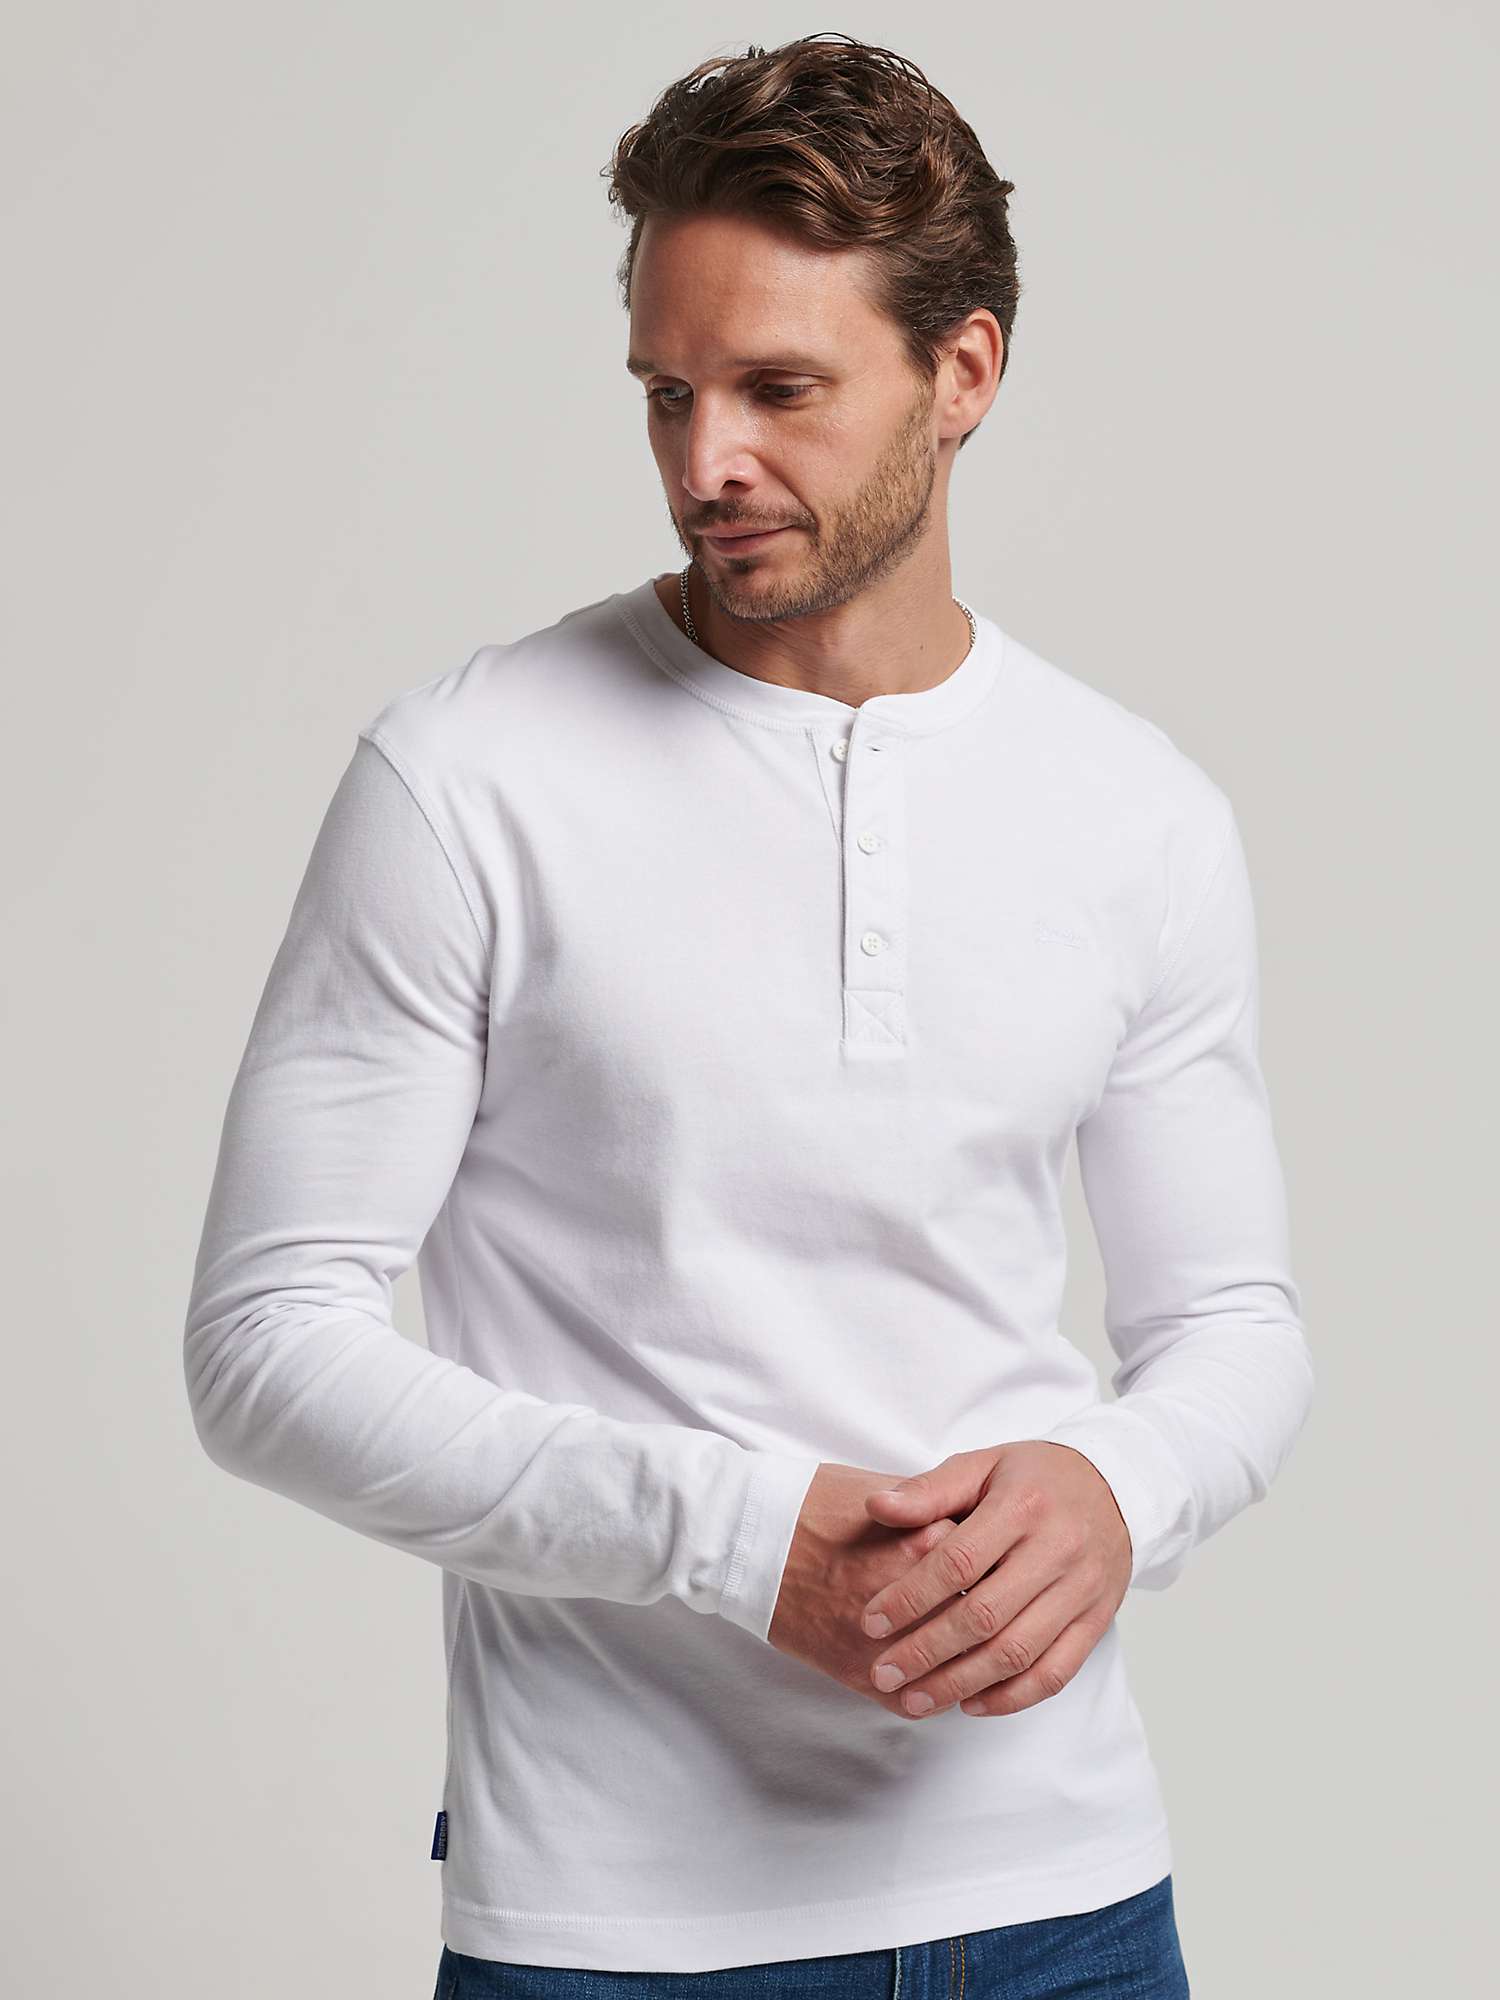 Buy Superdry Organic Cotton Henley Long Sleeve T-Shirt Online at johnlewis.com